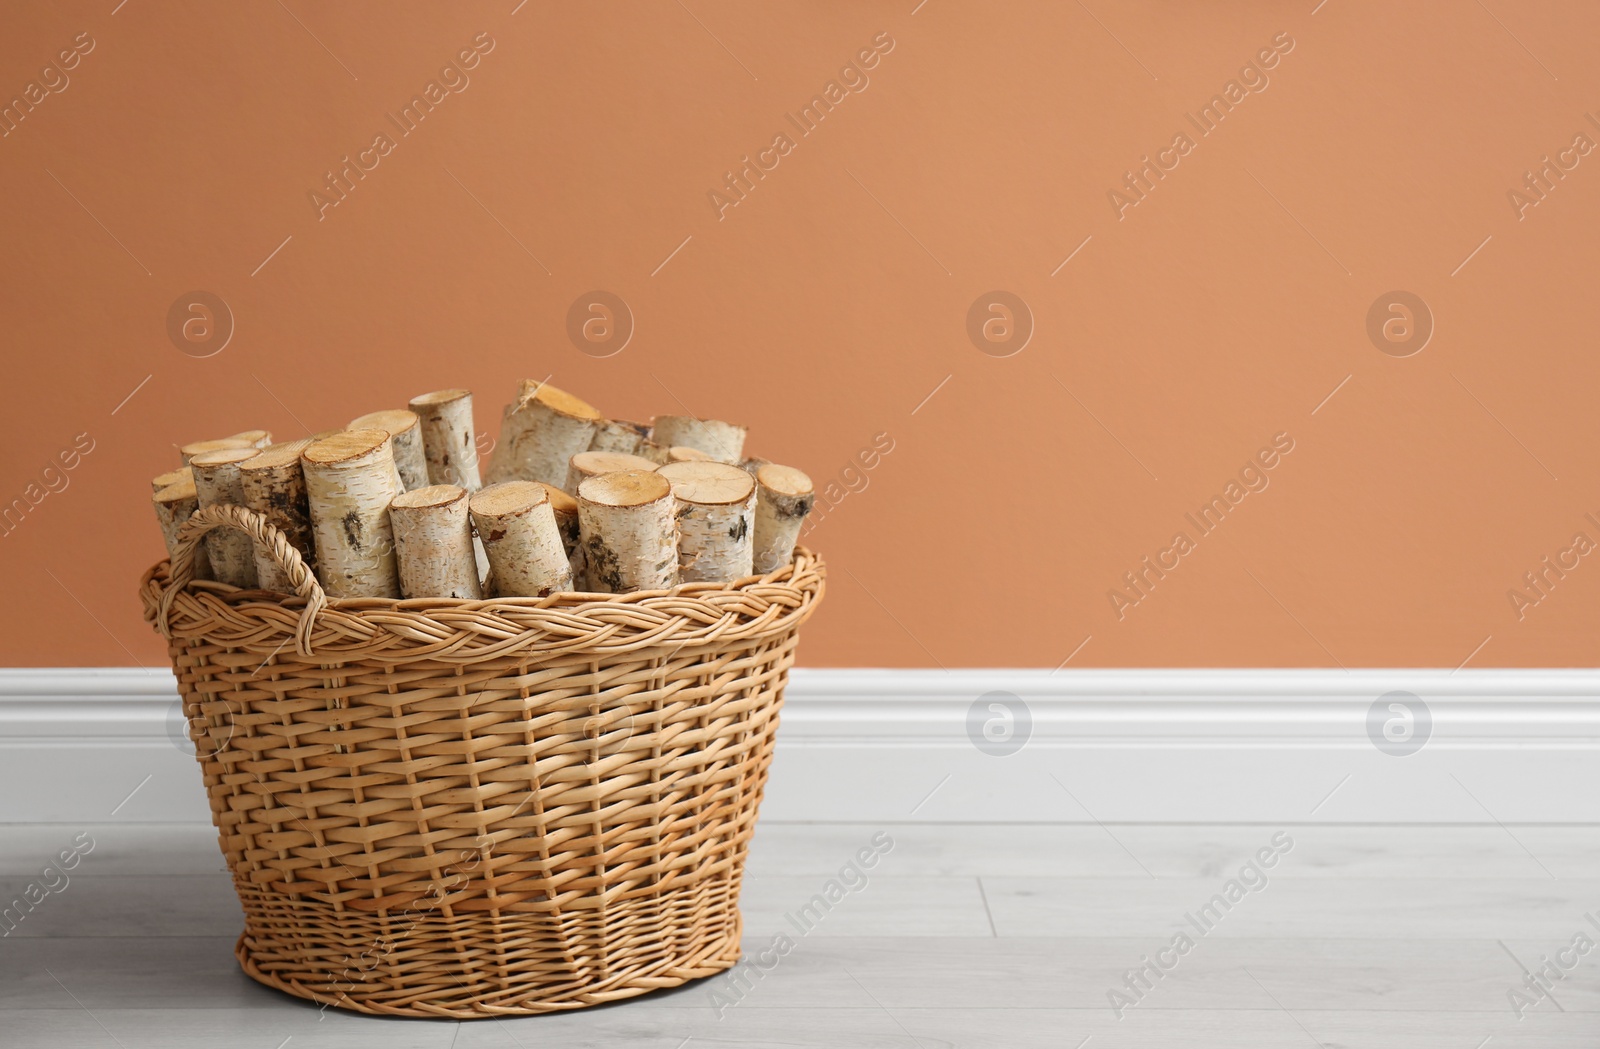 Photo of Wicker basket with firewood near brown wall indoors, space for text